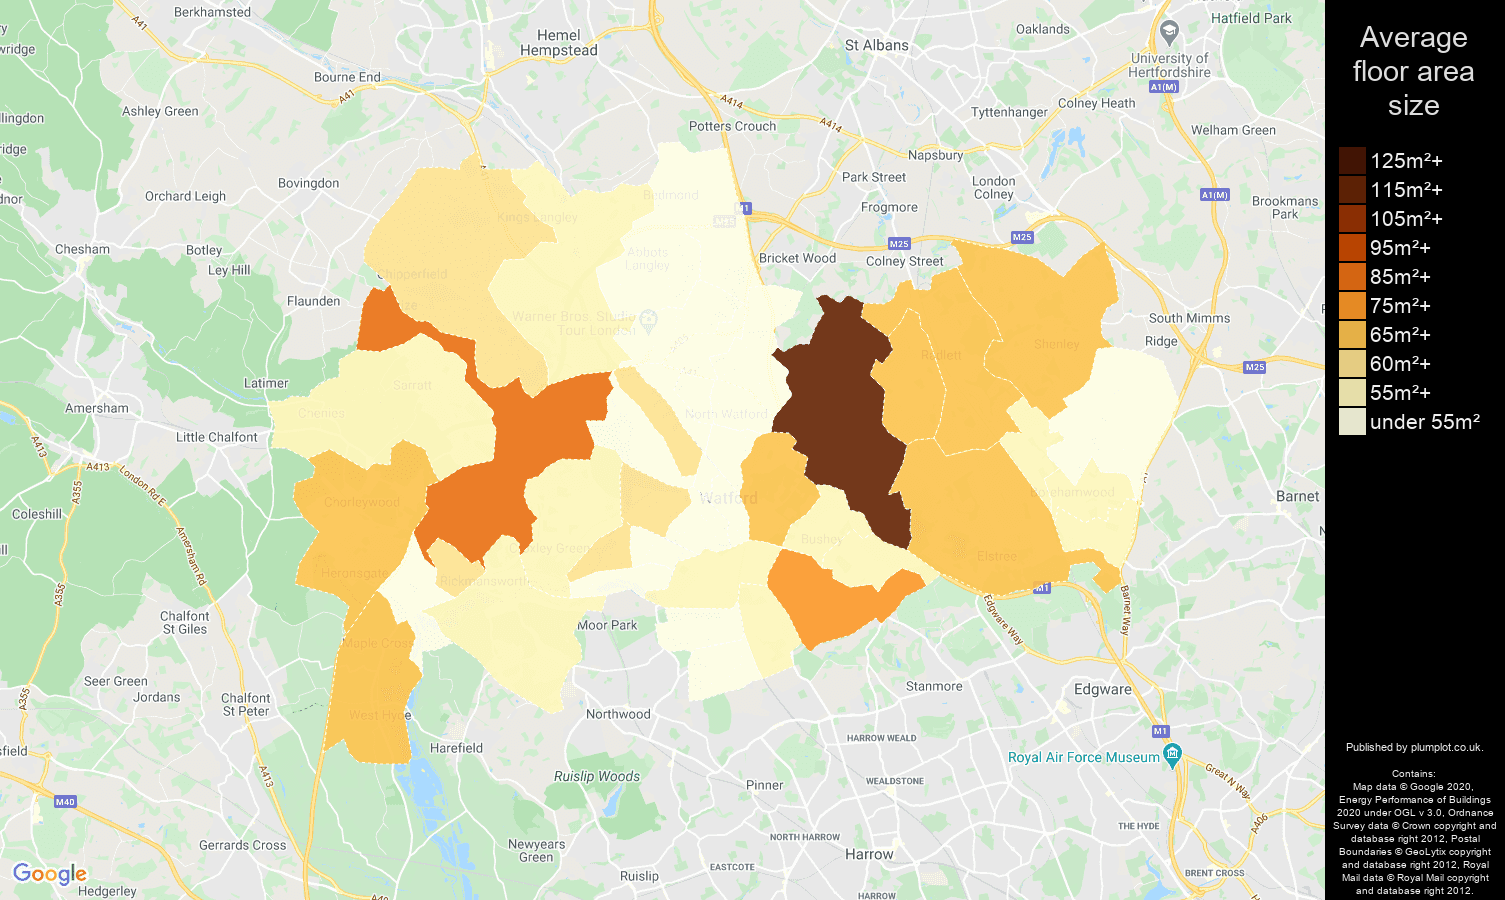 Watford map of average floor area size of flats